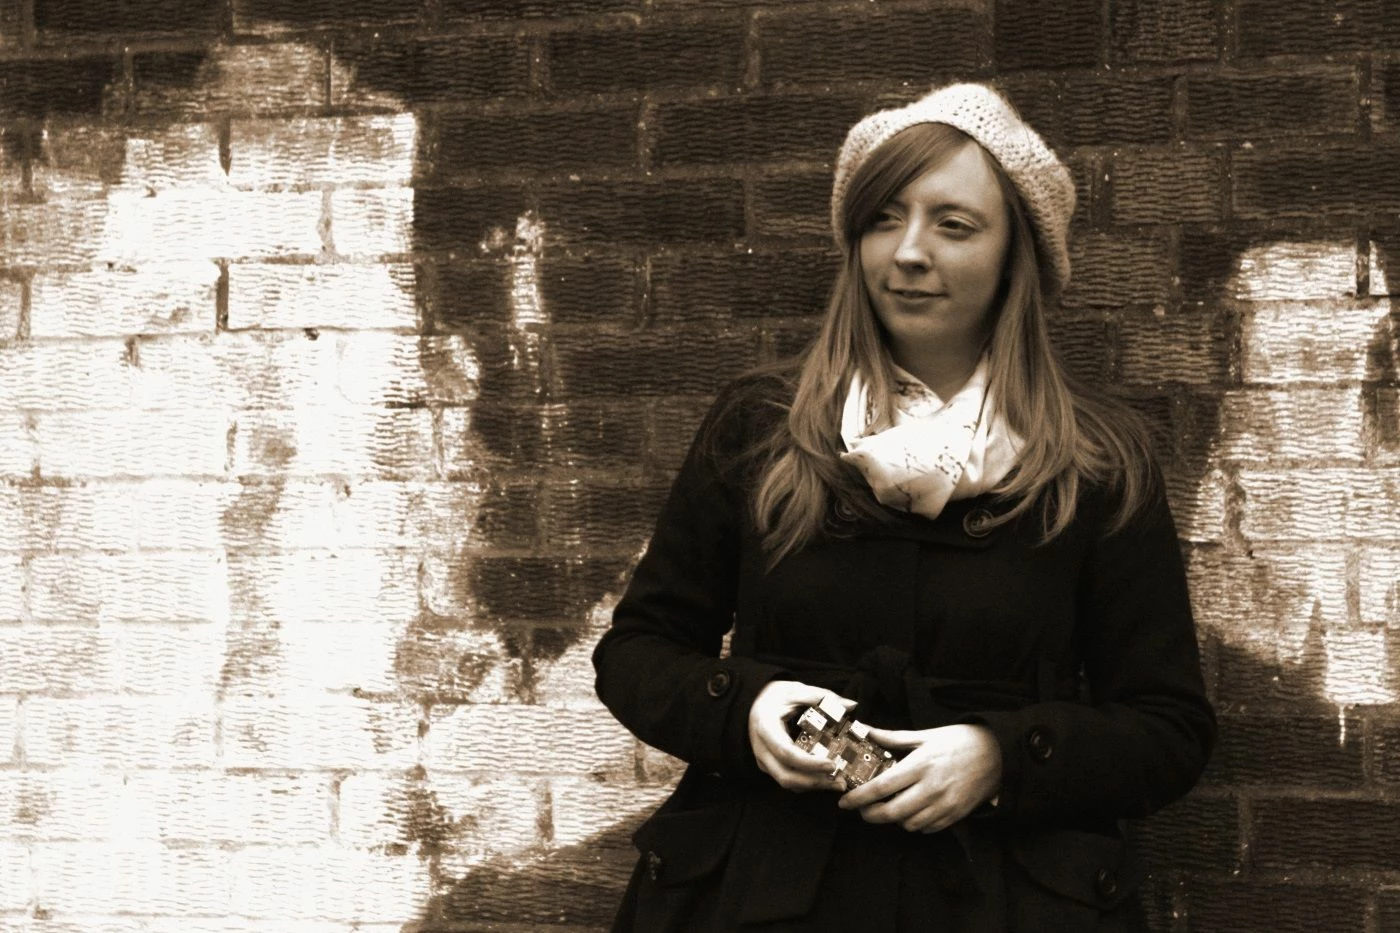 Carrie Anne Philbin has been announced to speak at Digital 2014